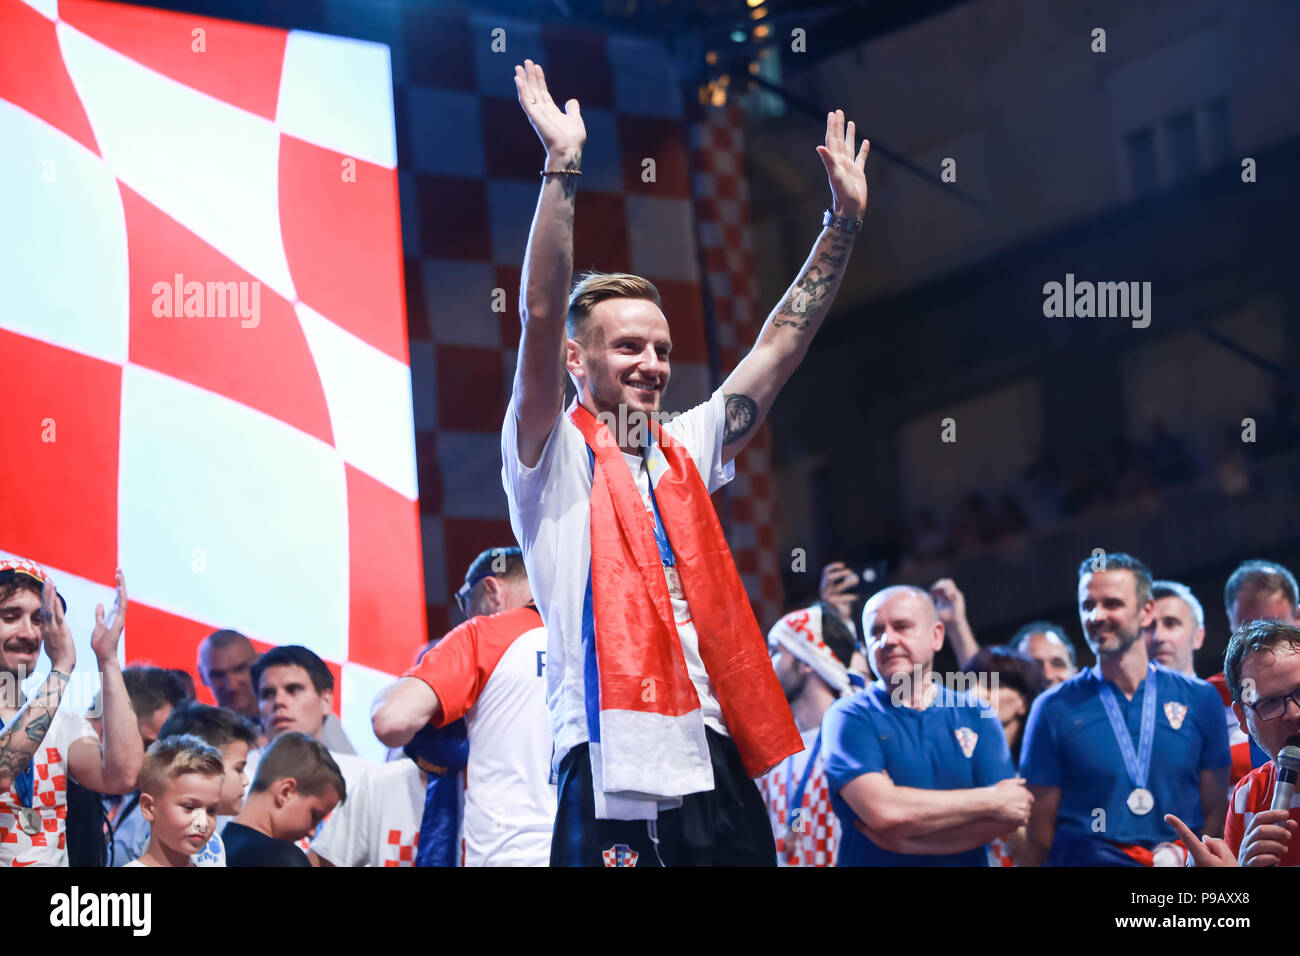 Zagreb, Croatia. 16th July, 2018. Welcome ceremony of Croatian football national team that won 2nd place, silver medal on Fifa World Cup 2018 on Ban Jelacic Square in Zagreb, Croatia. Ivan Rakitic on the stage. Credit: Goran Jakuš/Alamy Live News Stock Photo